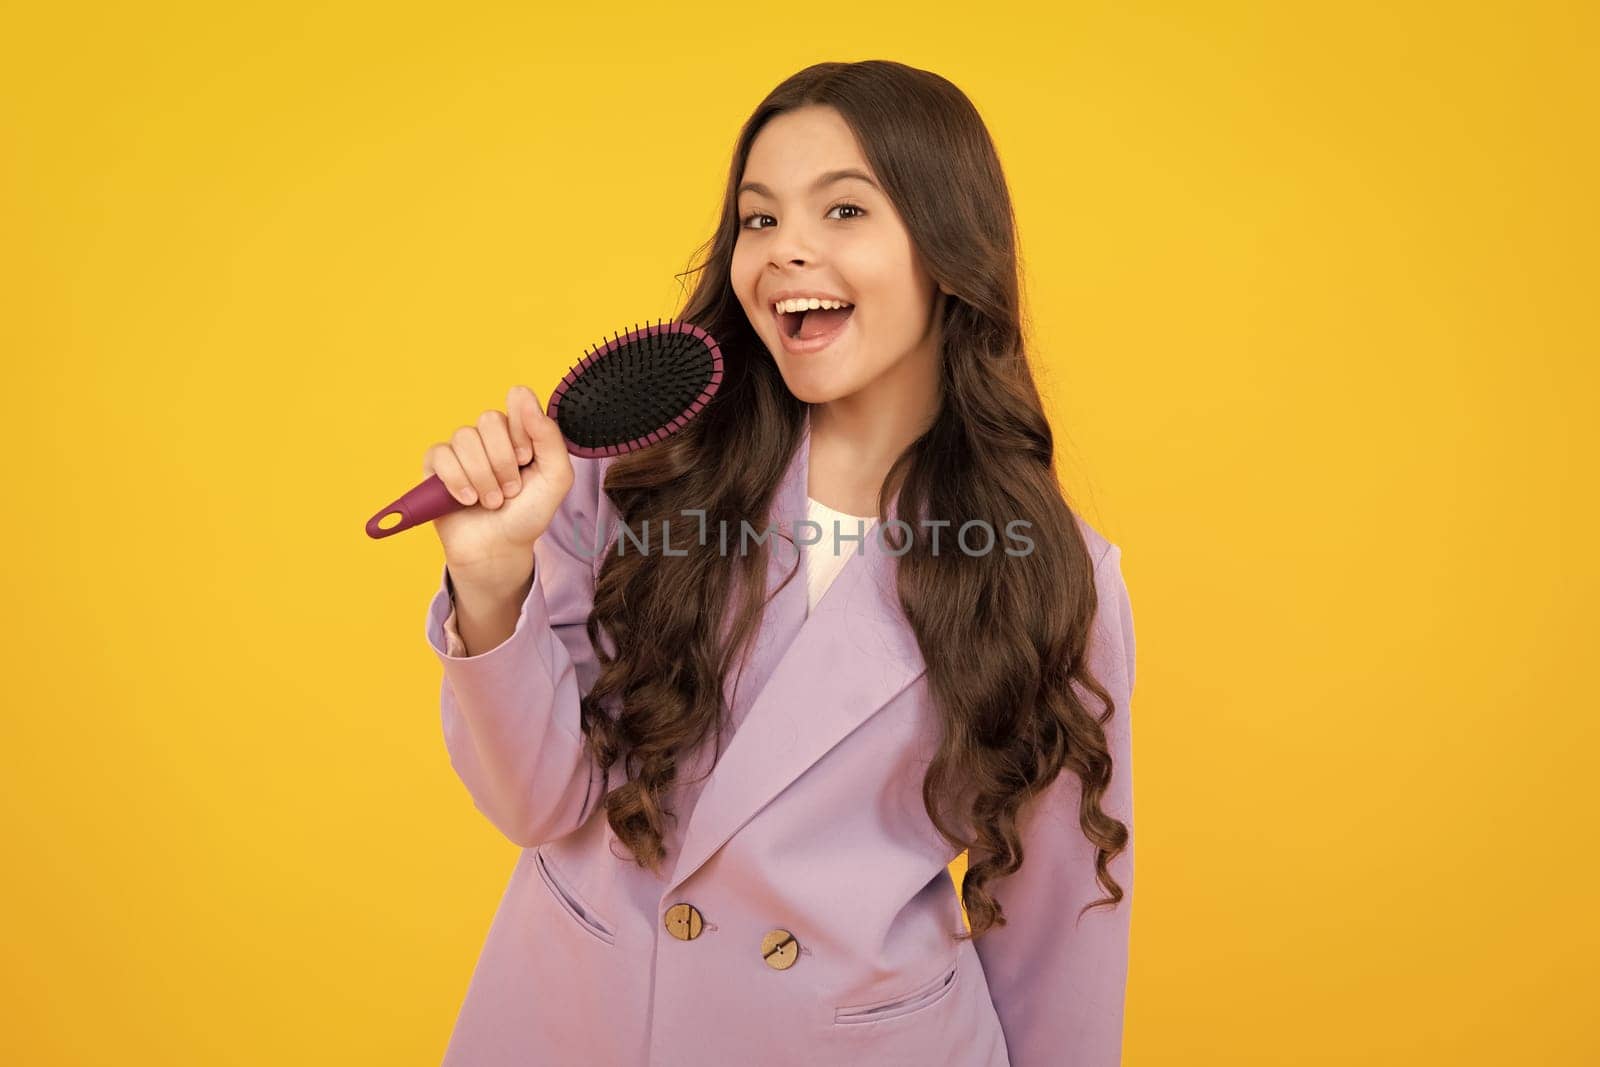 Child with long hair holding comb hairbrush for combing, beauty. Conditioner shampoo hair. Beauty kids salon. Child hairstyle. Happy face, positive and smiling emotions of teenager girl